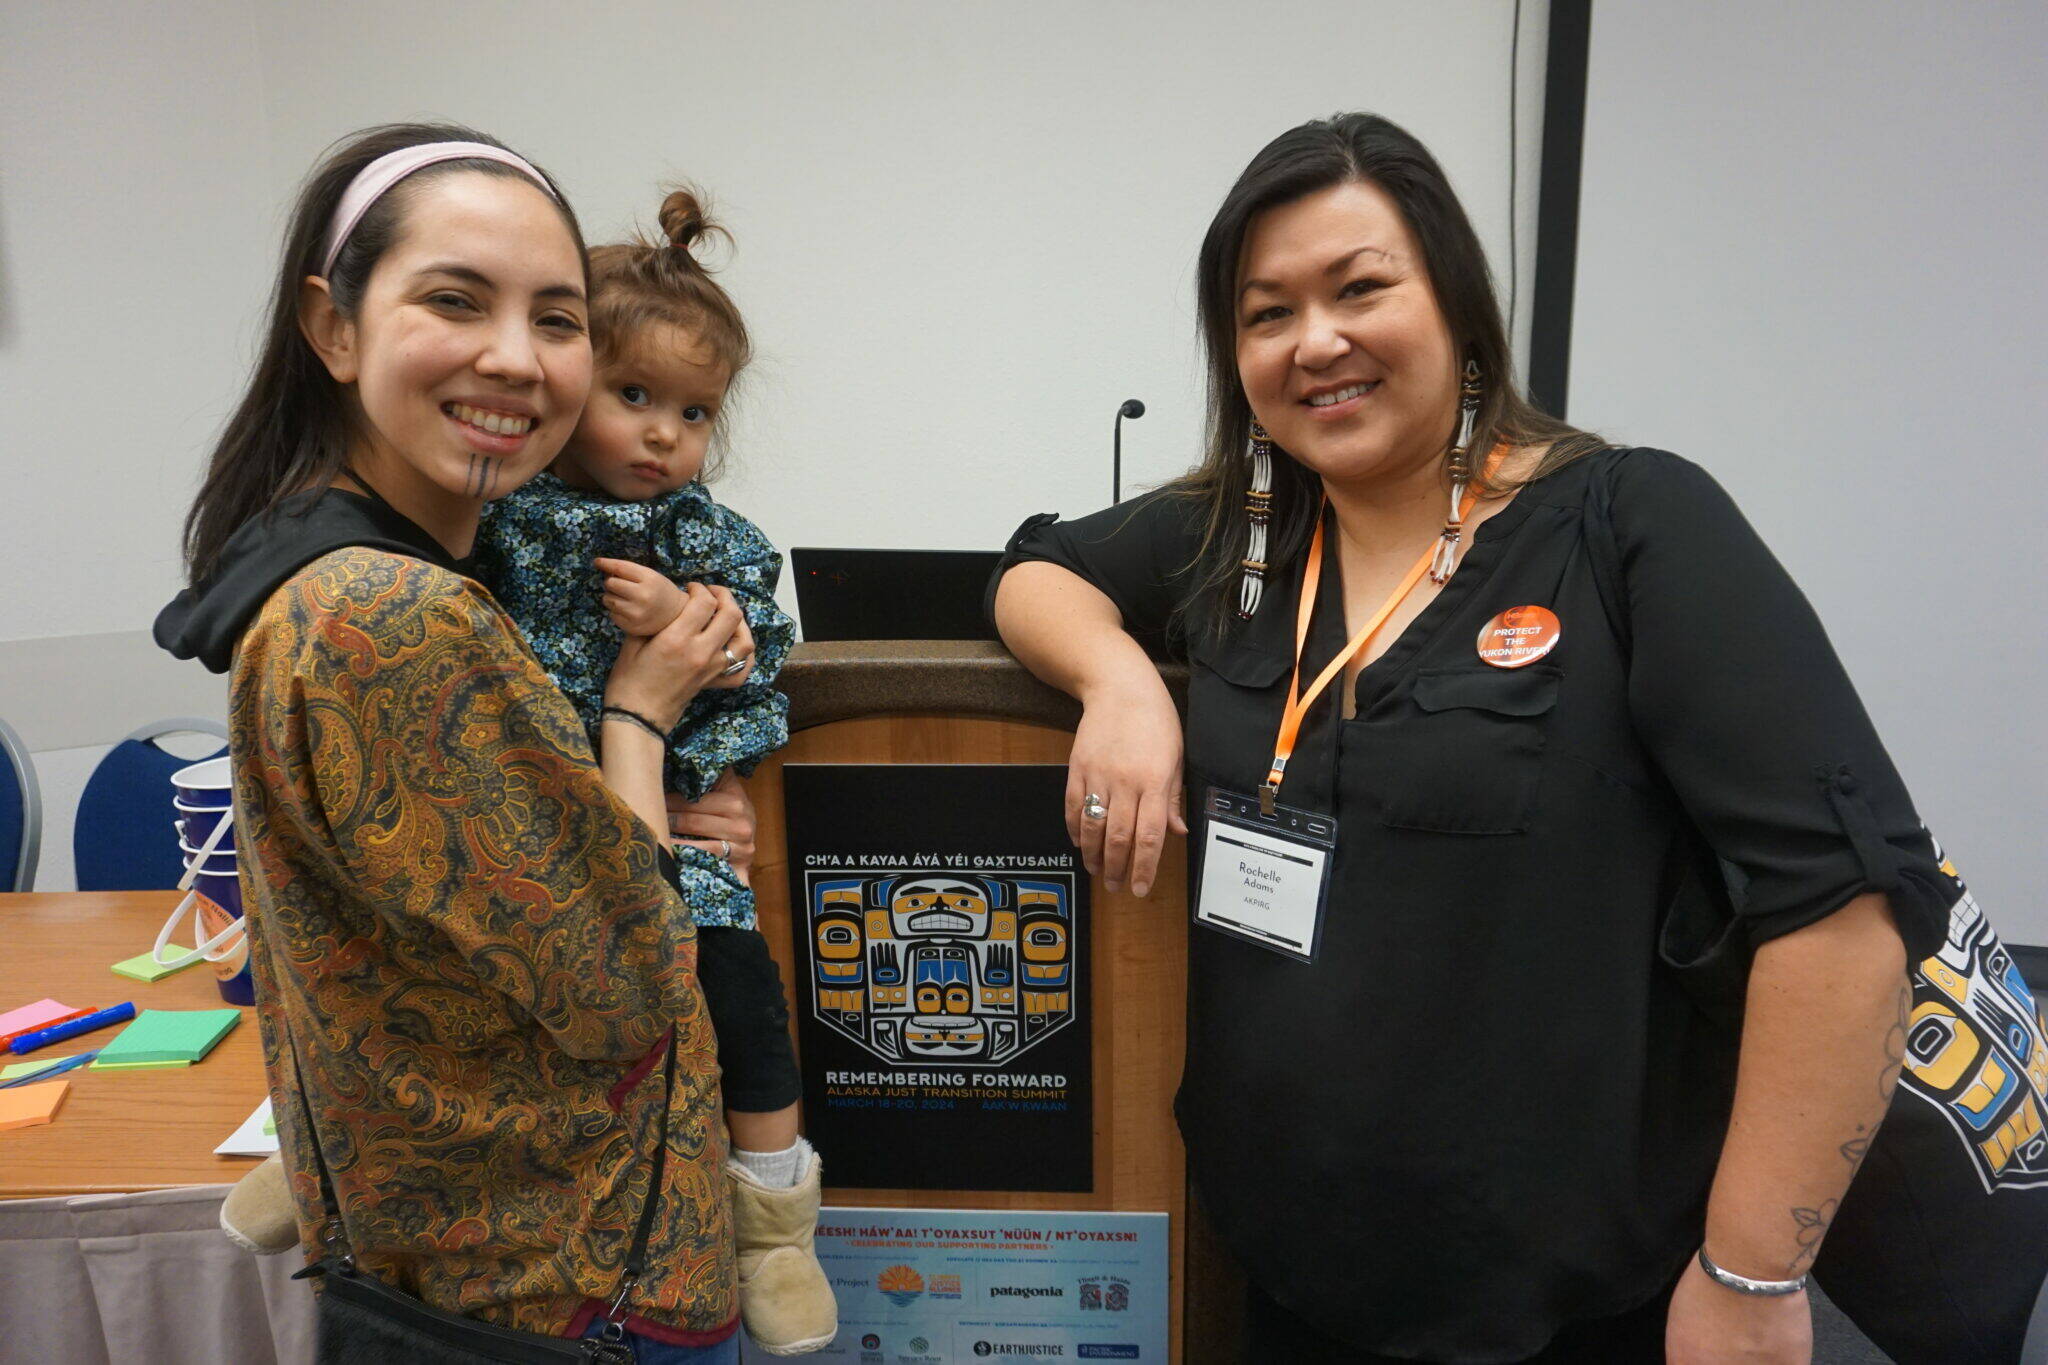 Annauk Olin, holding her daugher Tulġuna T’aas Olin, and Rochelle Adams pose on March 20, 2024, after giving a presentation on language at the Alaska Just Transition Summit in Juneau. The two, who work together at the Alaska Public Interest Research Group’s Language Access program, hope to compile an Indigenous environmental glossary. (Photo by Yereth Rosen/Alaska Beacon)